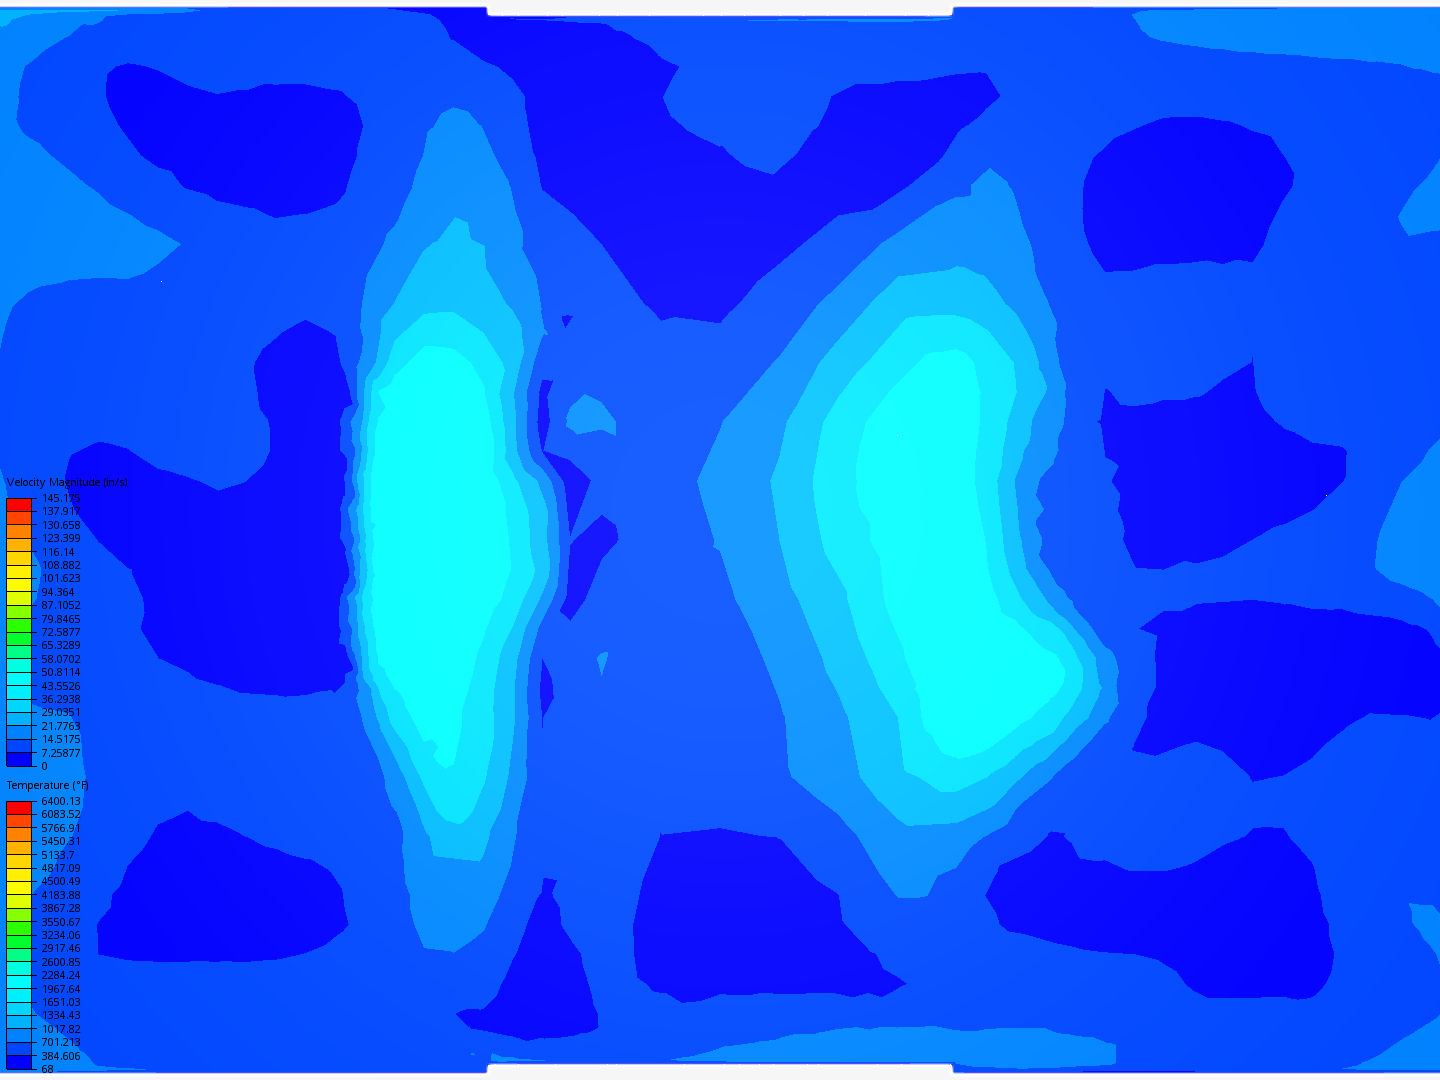 Container Thermal Comfort image